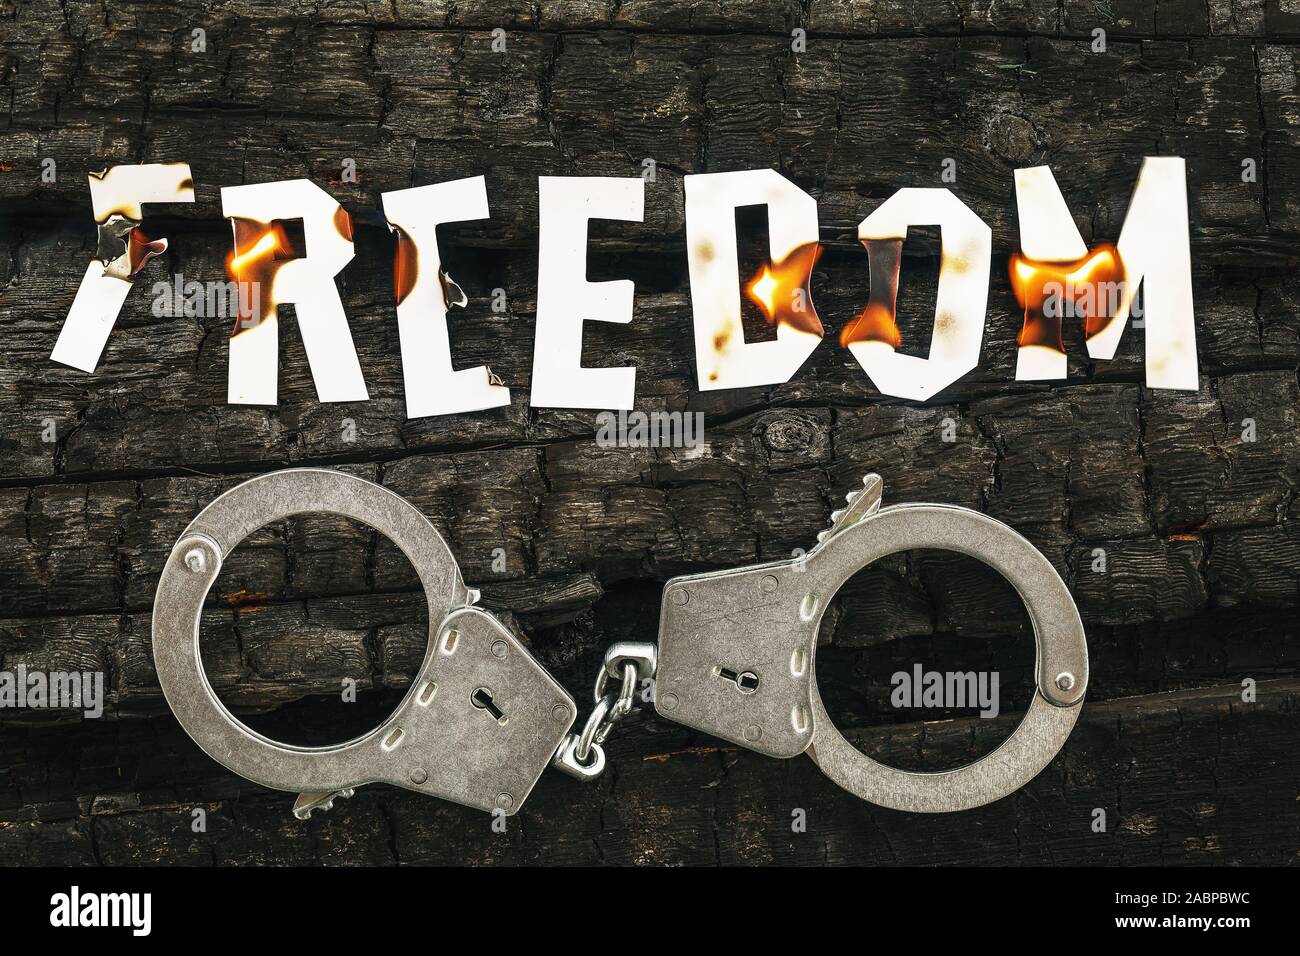 The word freedom burns on coals, and handcuffs lie nearby. Burning letters made of paper. Justice concept Stock Photo